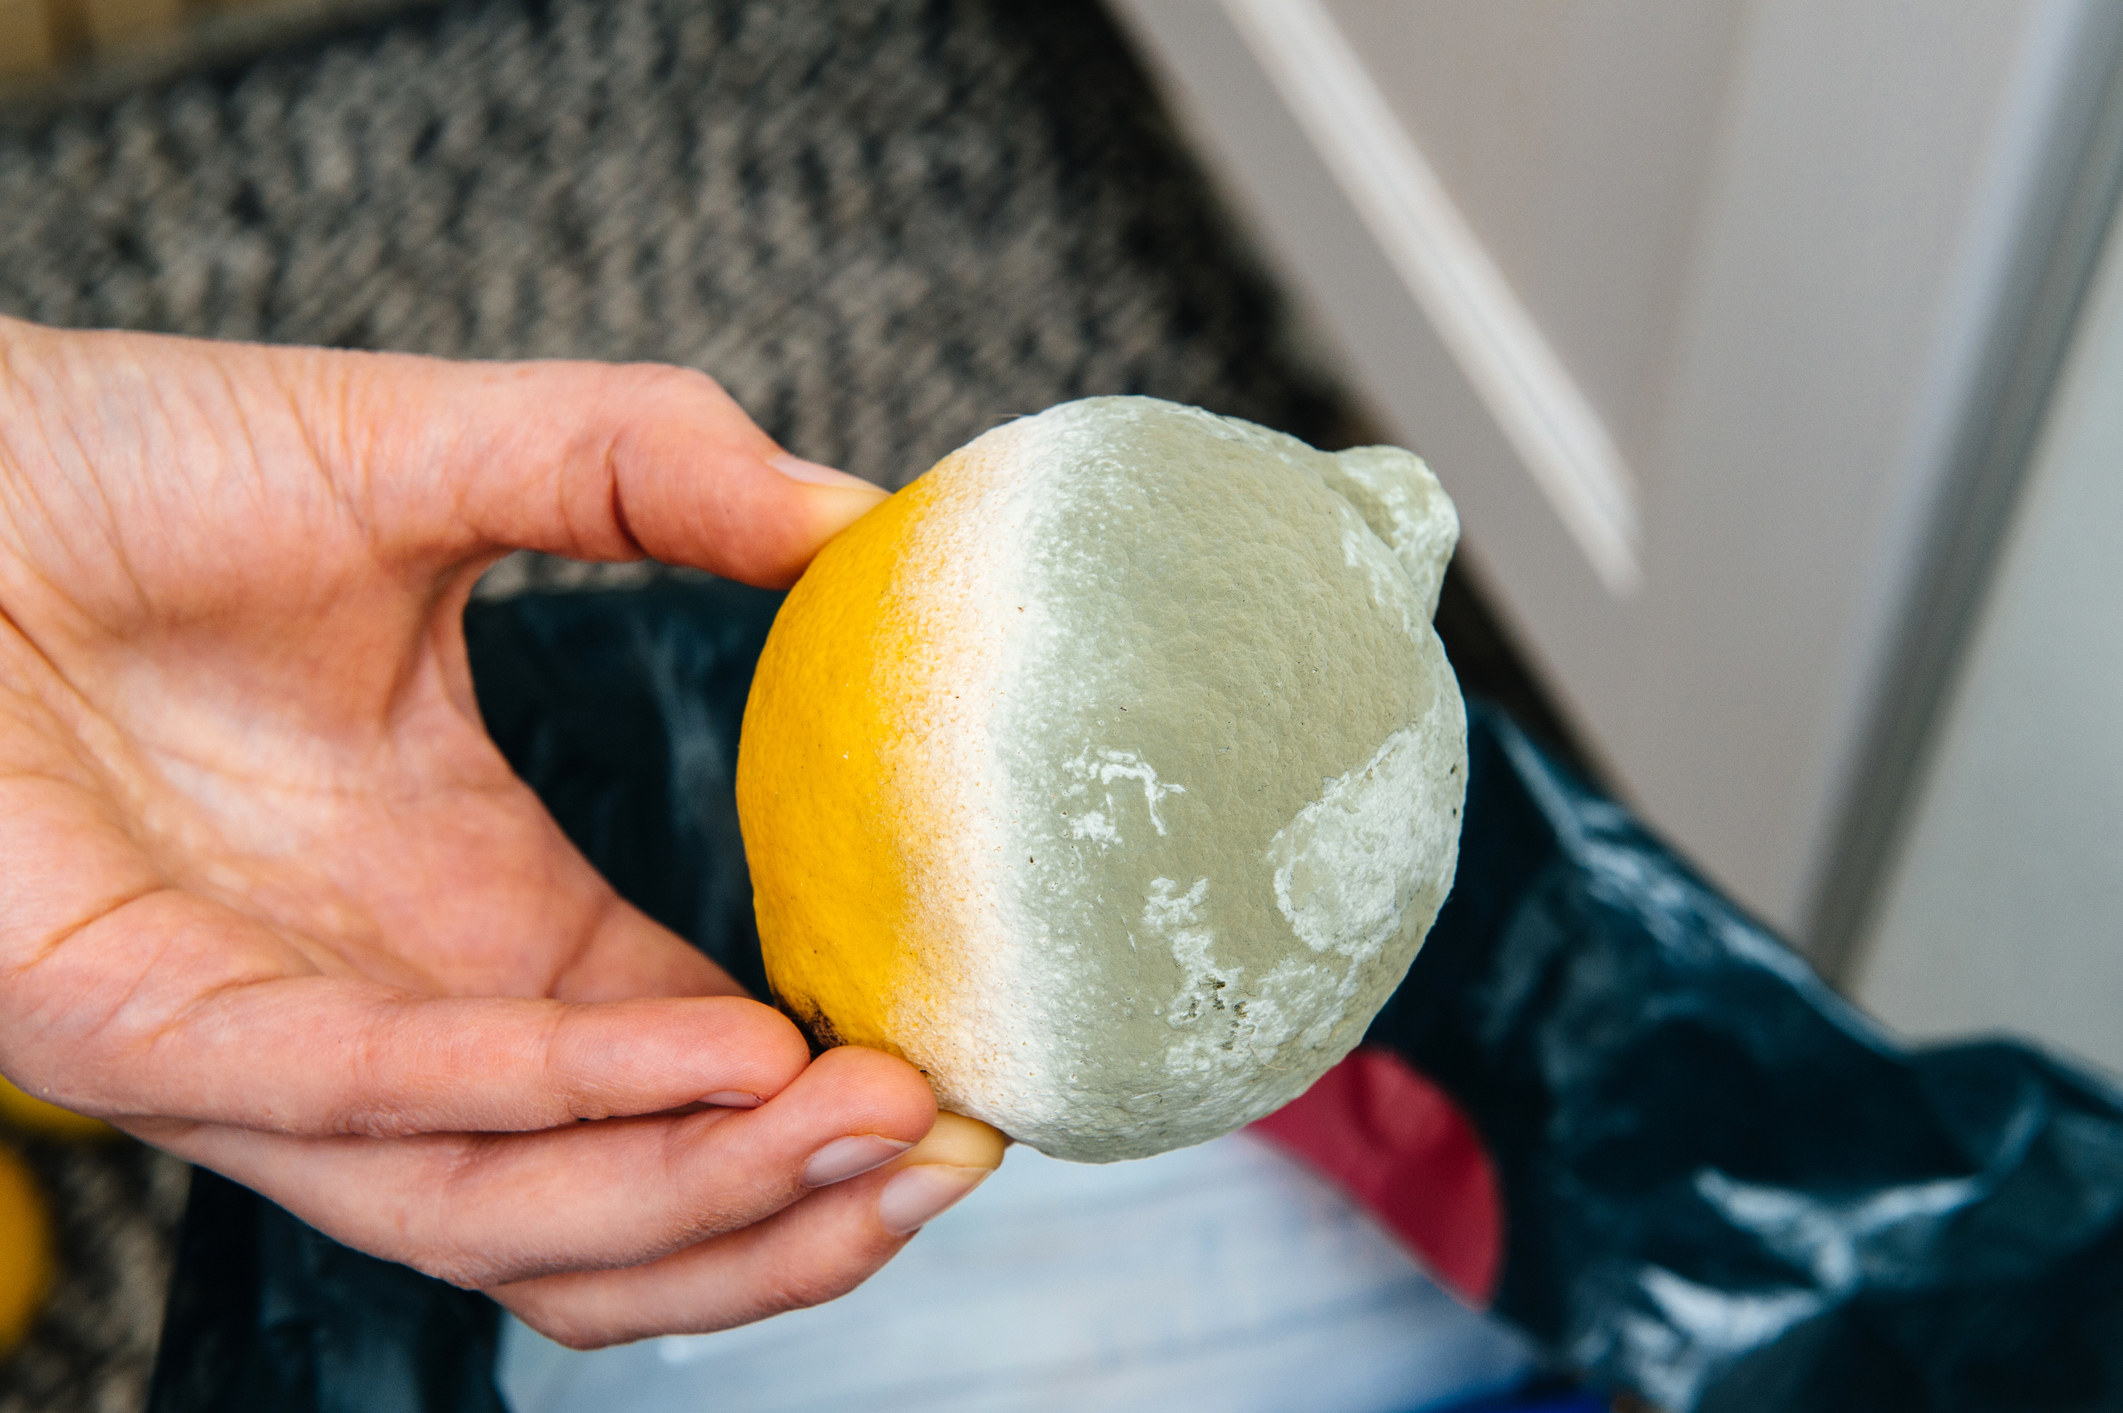 A hand holding a lemon that is partially covered with mold